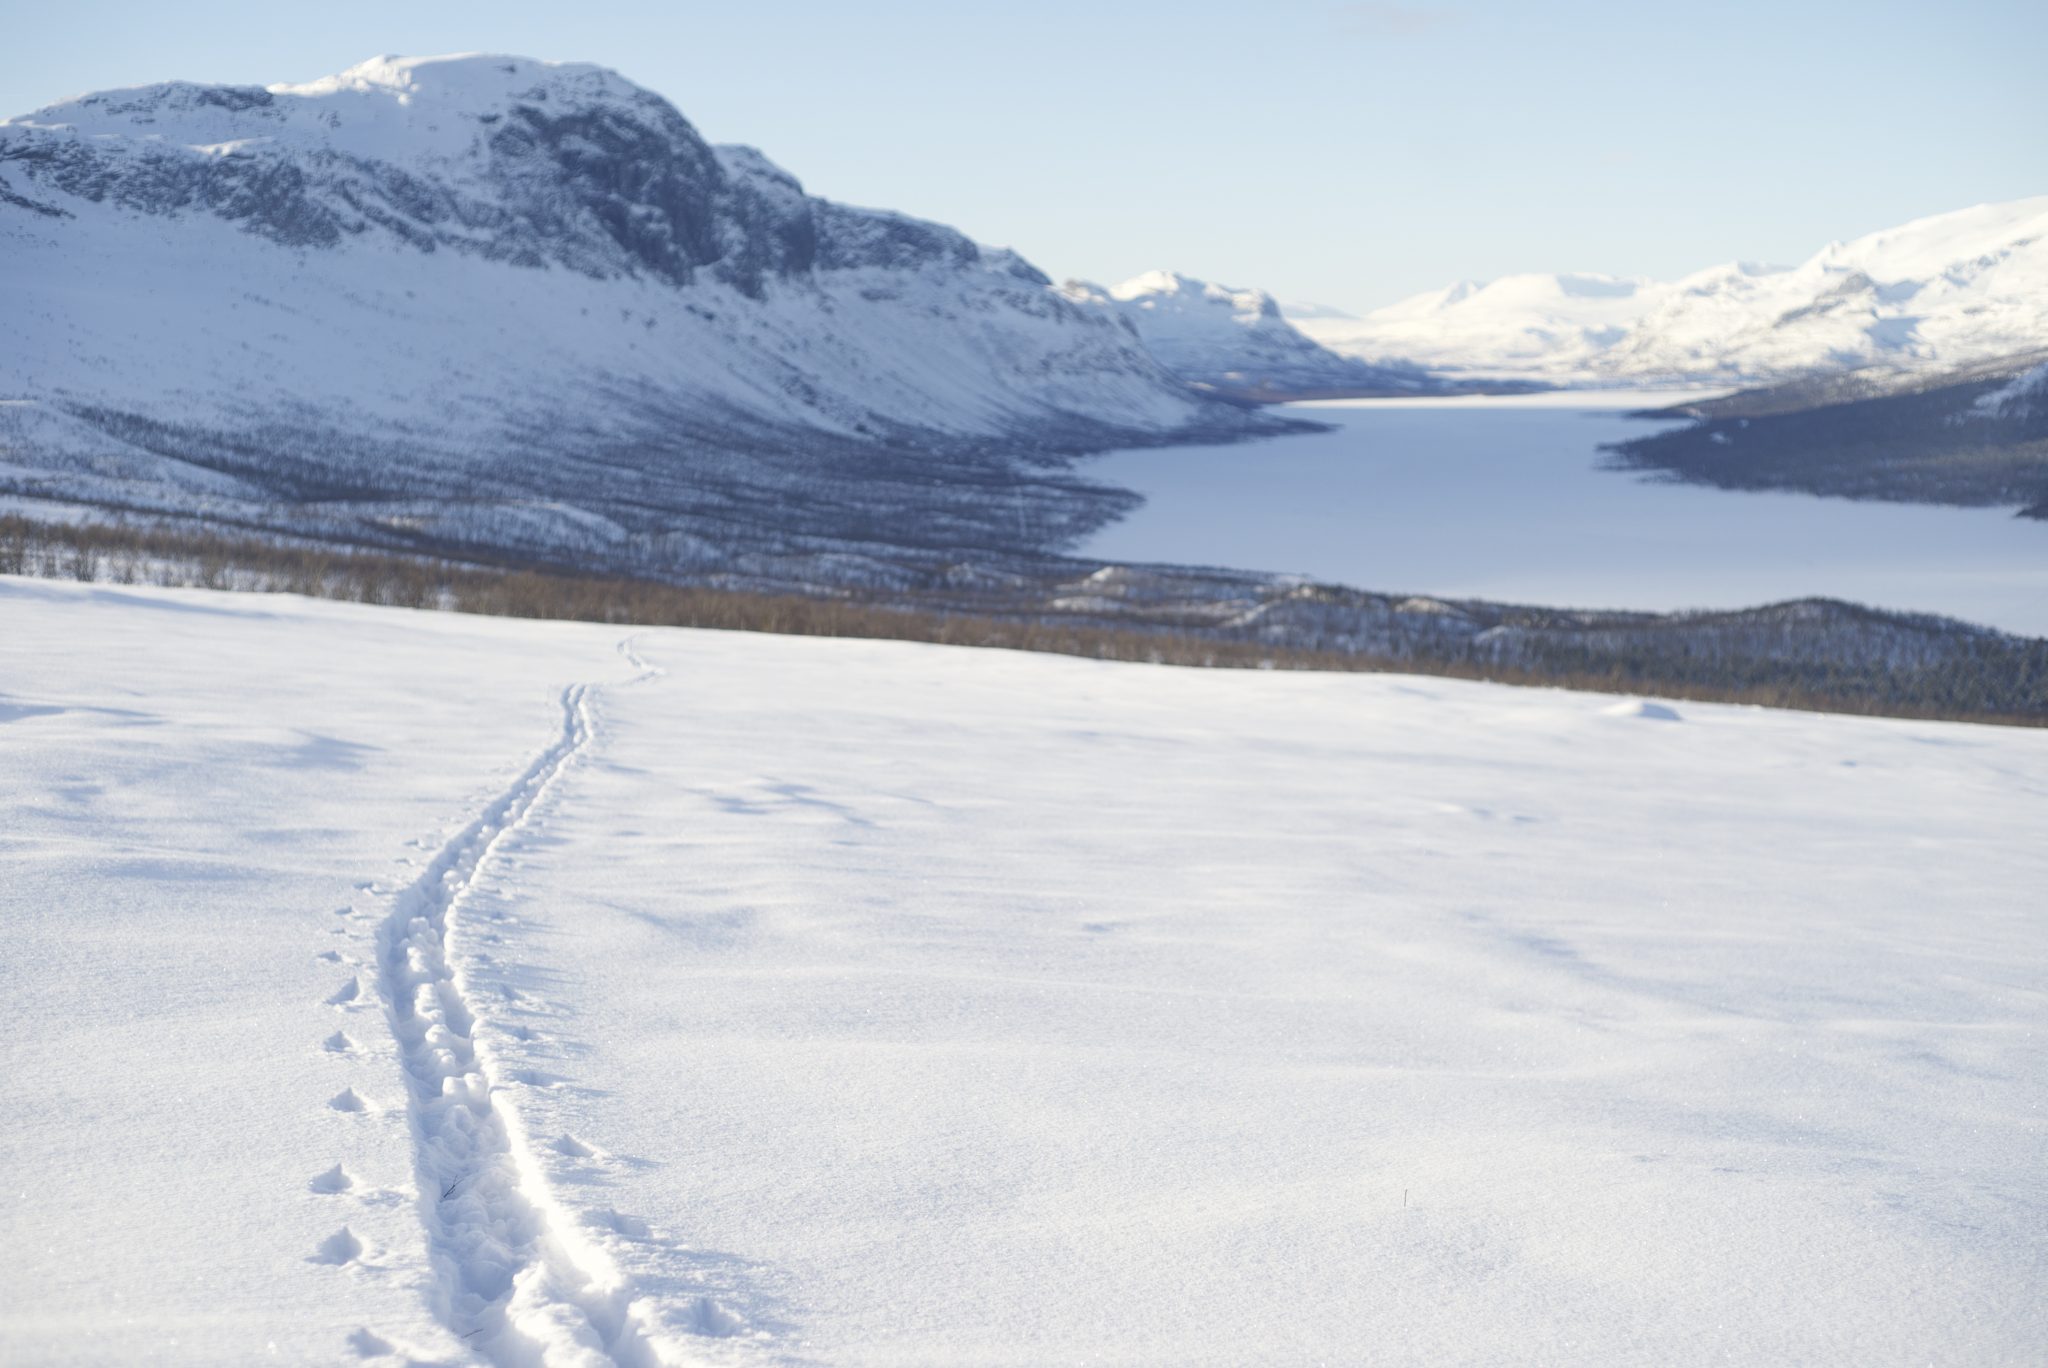 A trail in snow with mountains on the backround